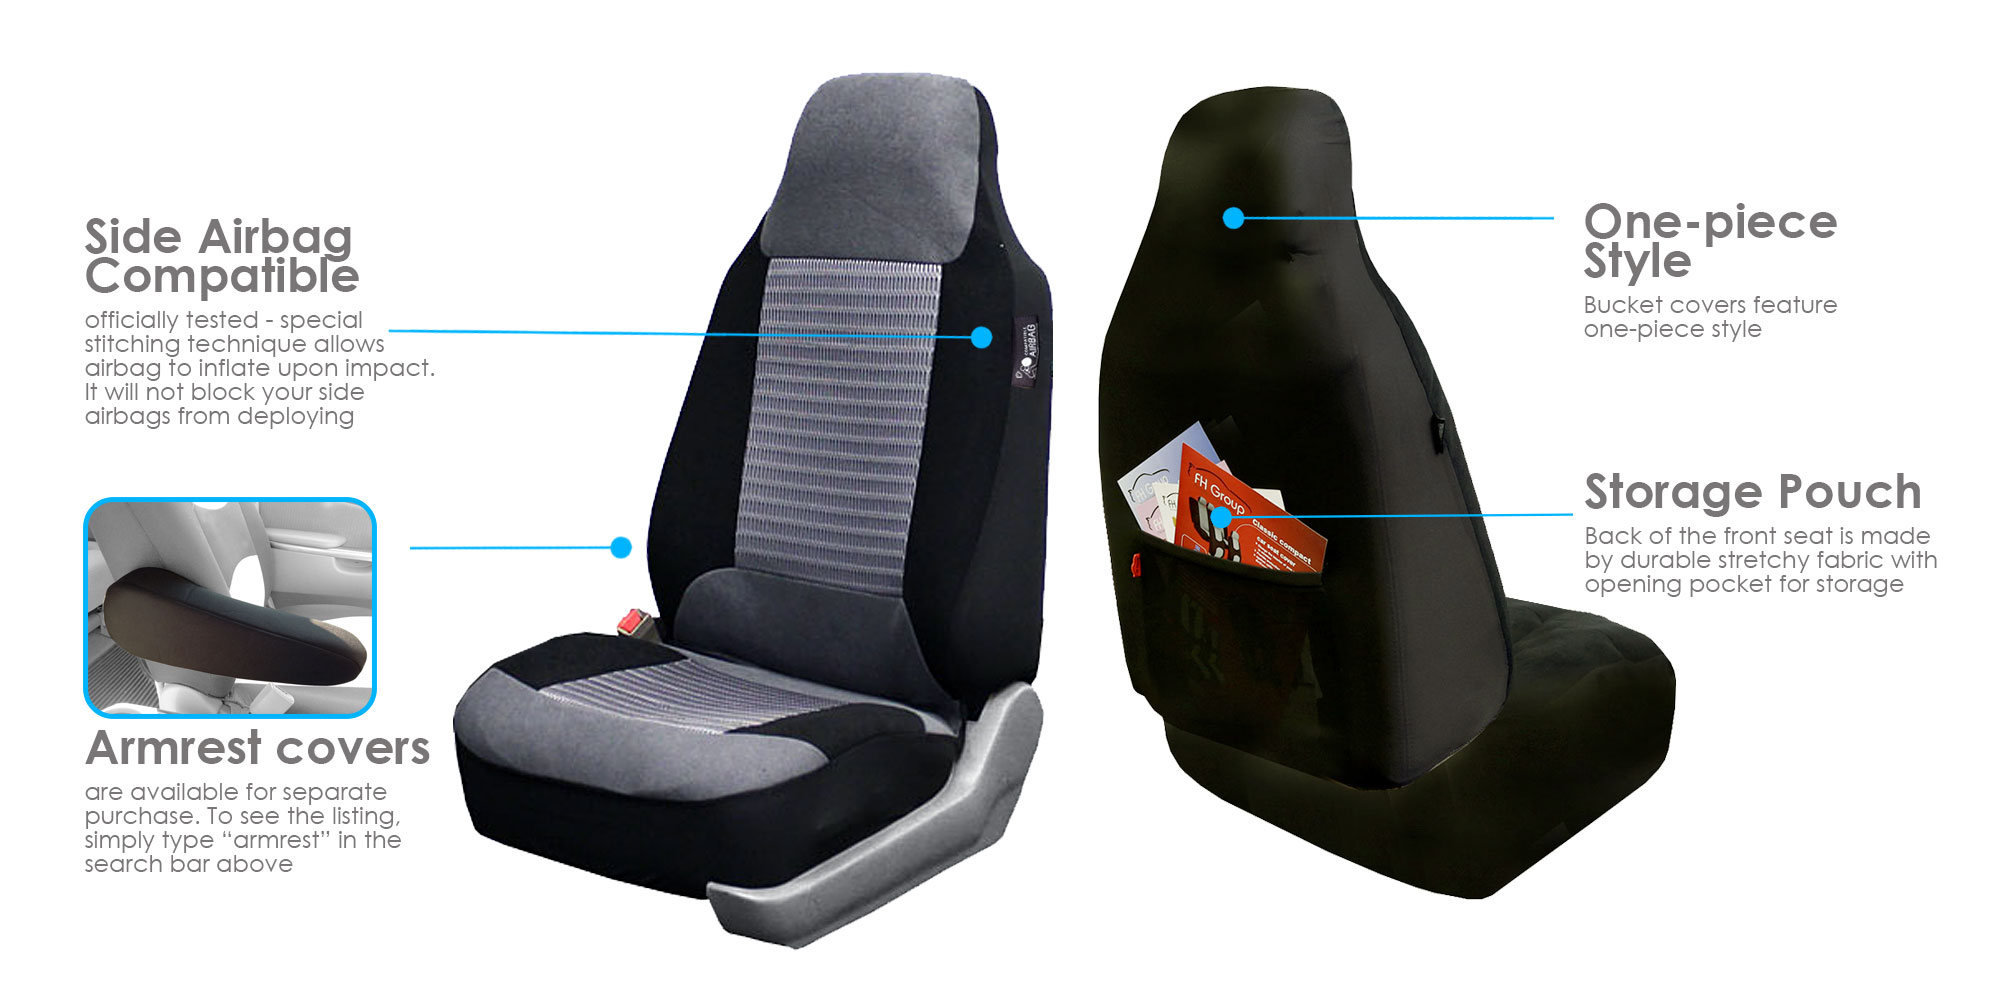 FH Group Premium Fabric Universal Seat Covers Fit For Car Truck SUV Van Gray/Black - Front Seats - image 3 of 3